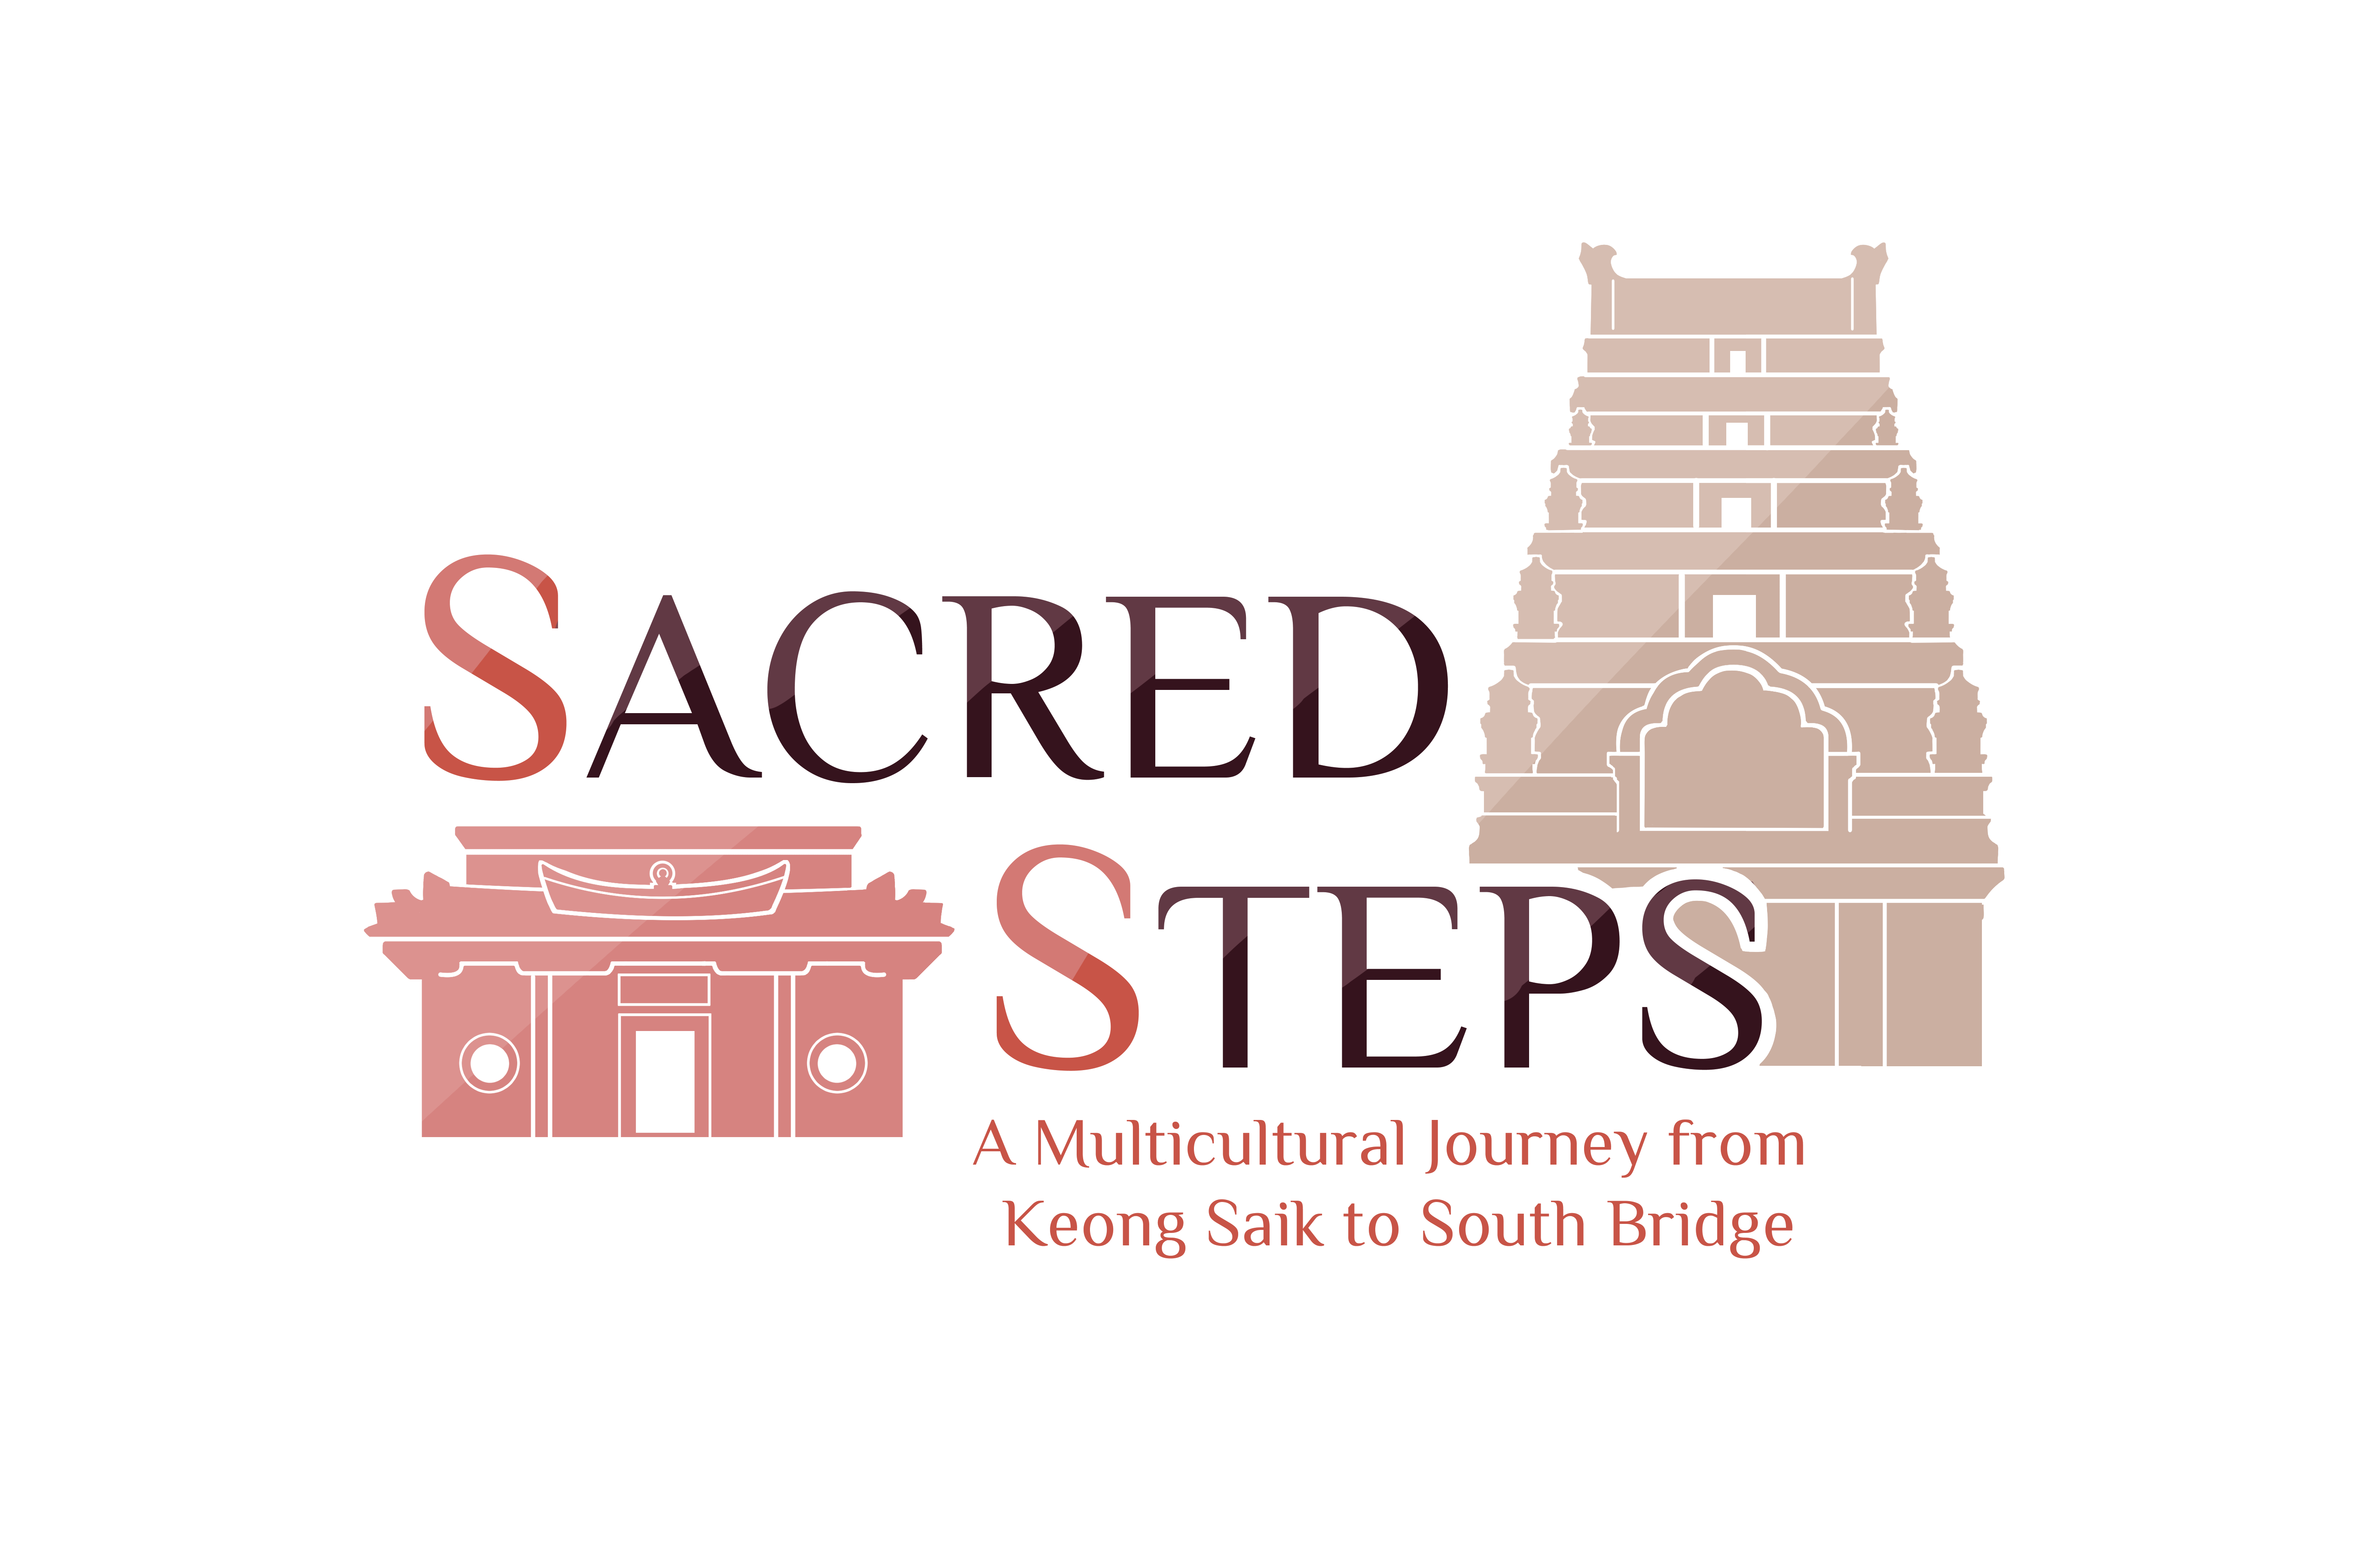 Sacred-Steps-A-Multicultural-Journey-from-Keong-Saik-to-South-Bridge